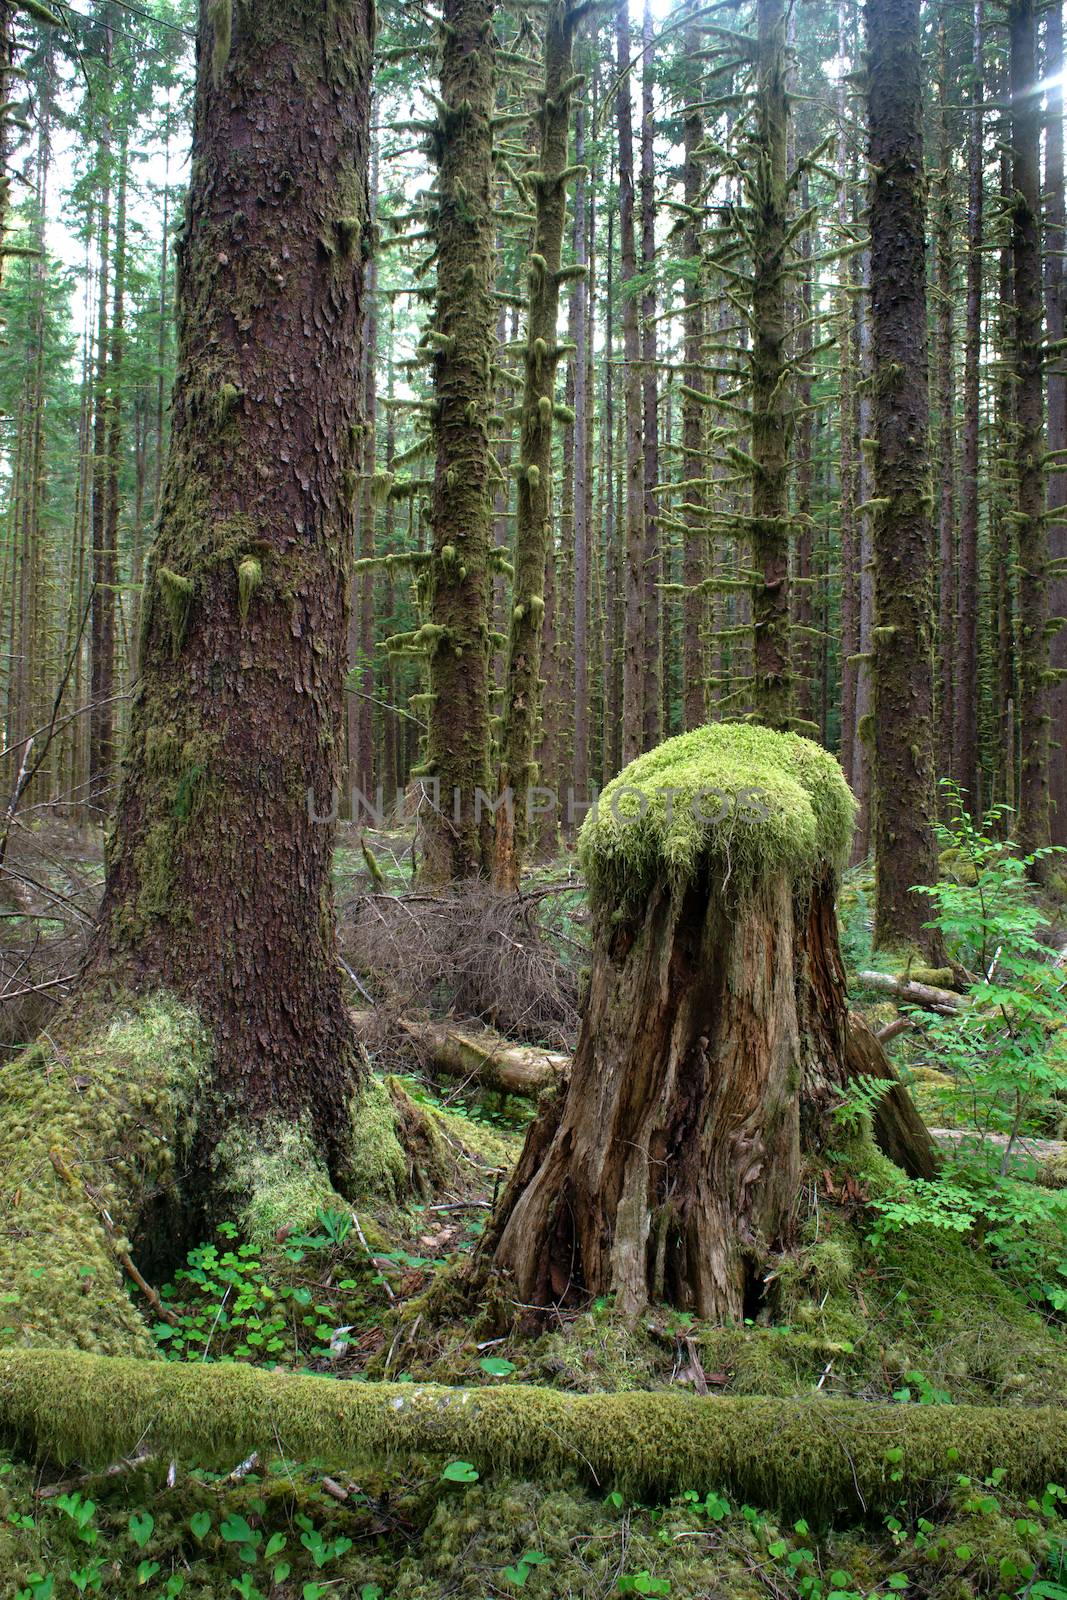 Rainforest Old Stump Death Brings New Growth Life  by ChrisBoswell